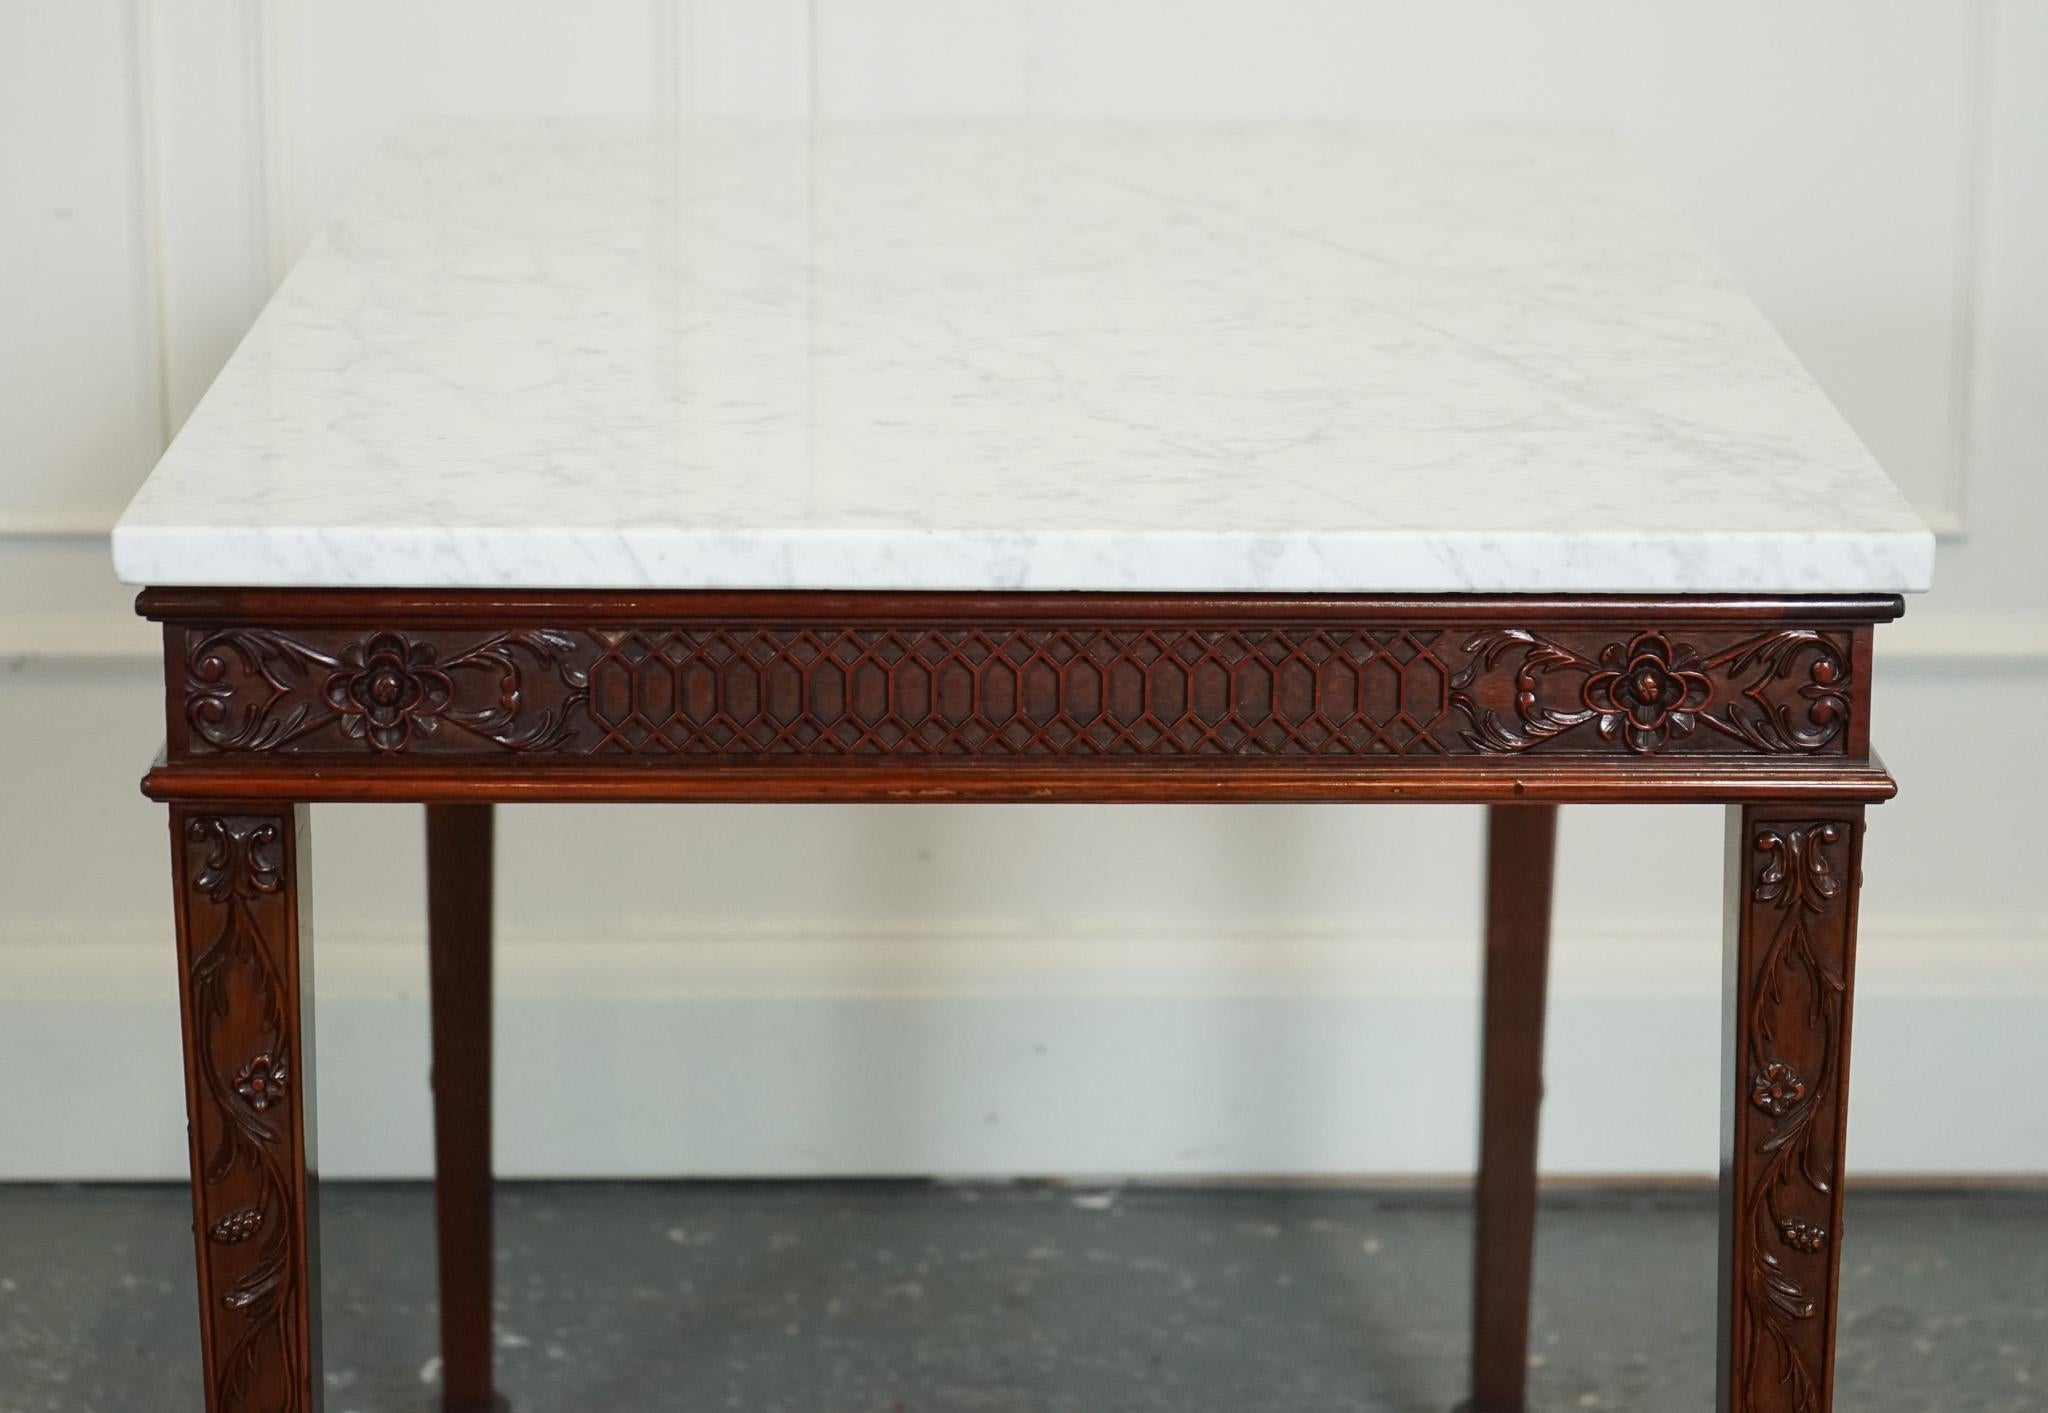 PAiR OF CHIPPENDALE STYLE CONSOLE TABLES WITH NEW WHITE CARRARA MARBLE TOPS For Sale 1